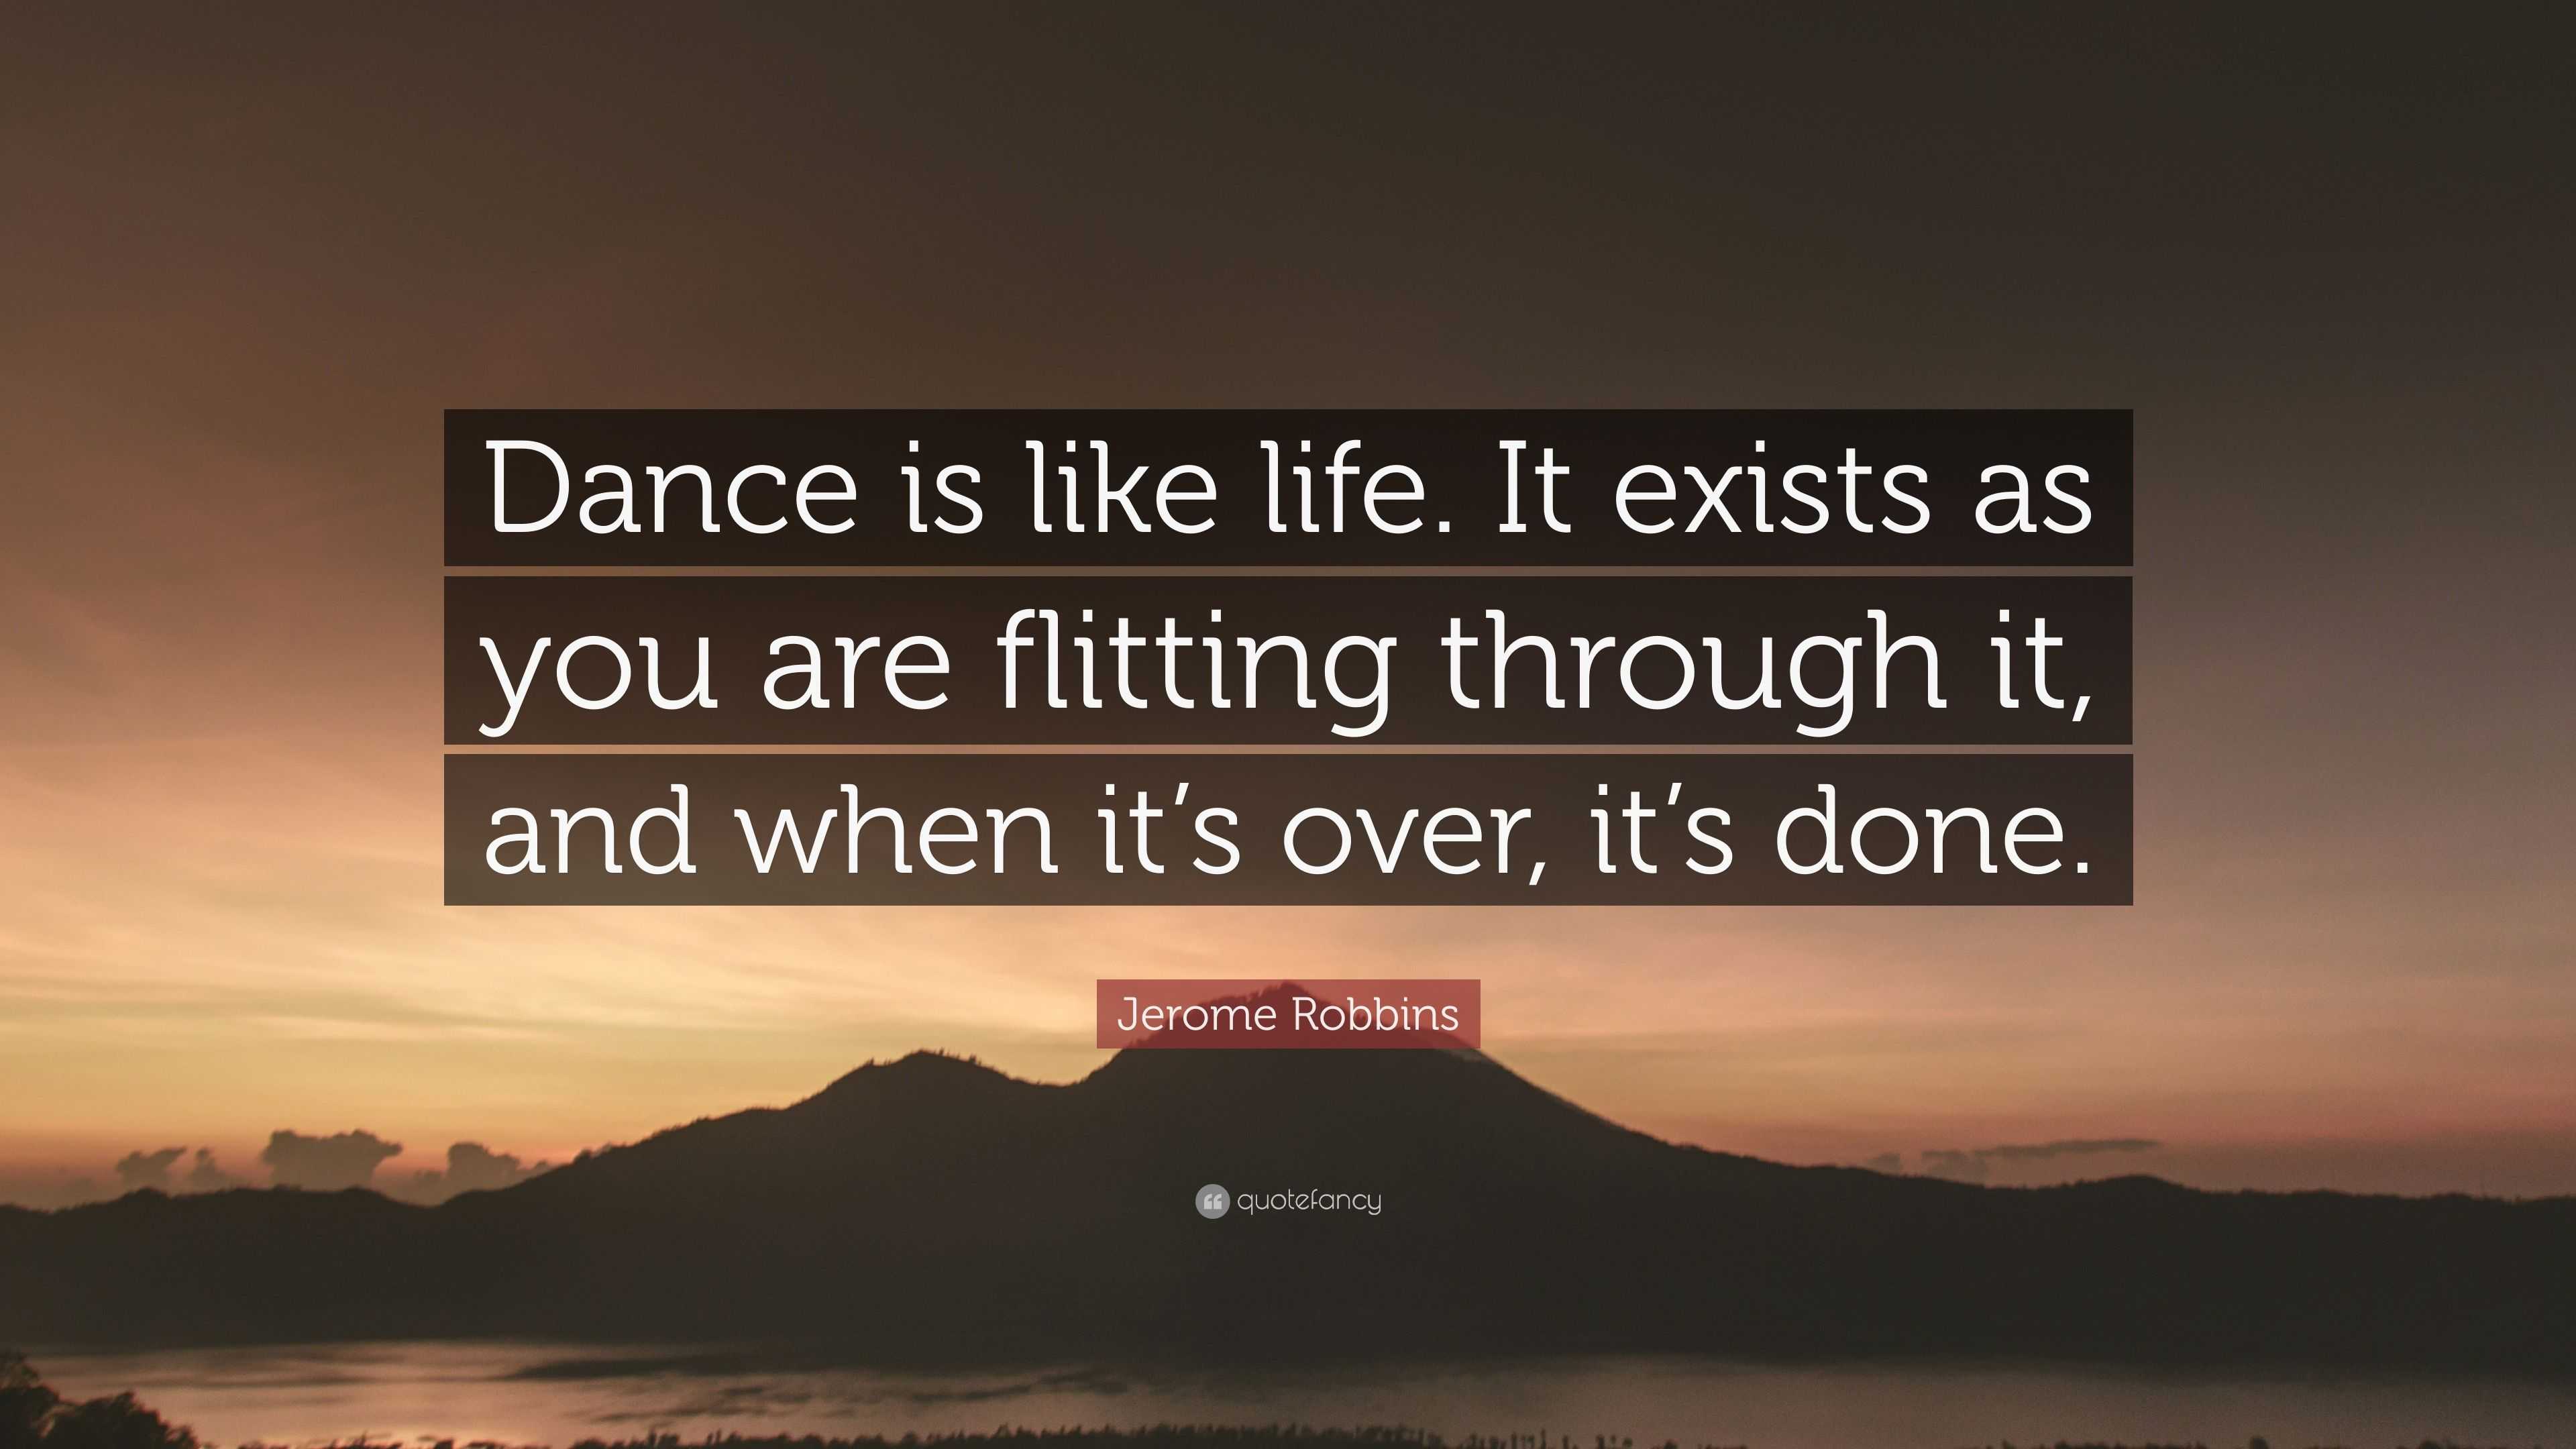 Jerome Robbins Quote “Dance is like life It exists as you are flitting